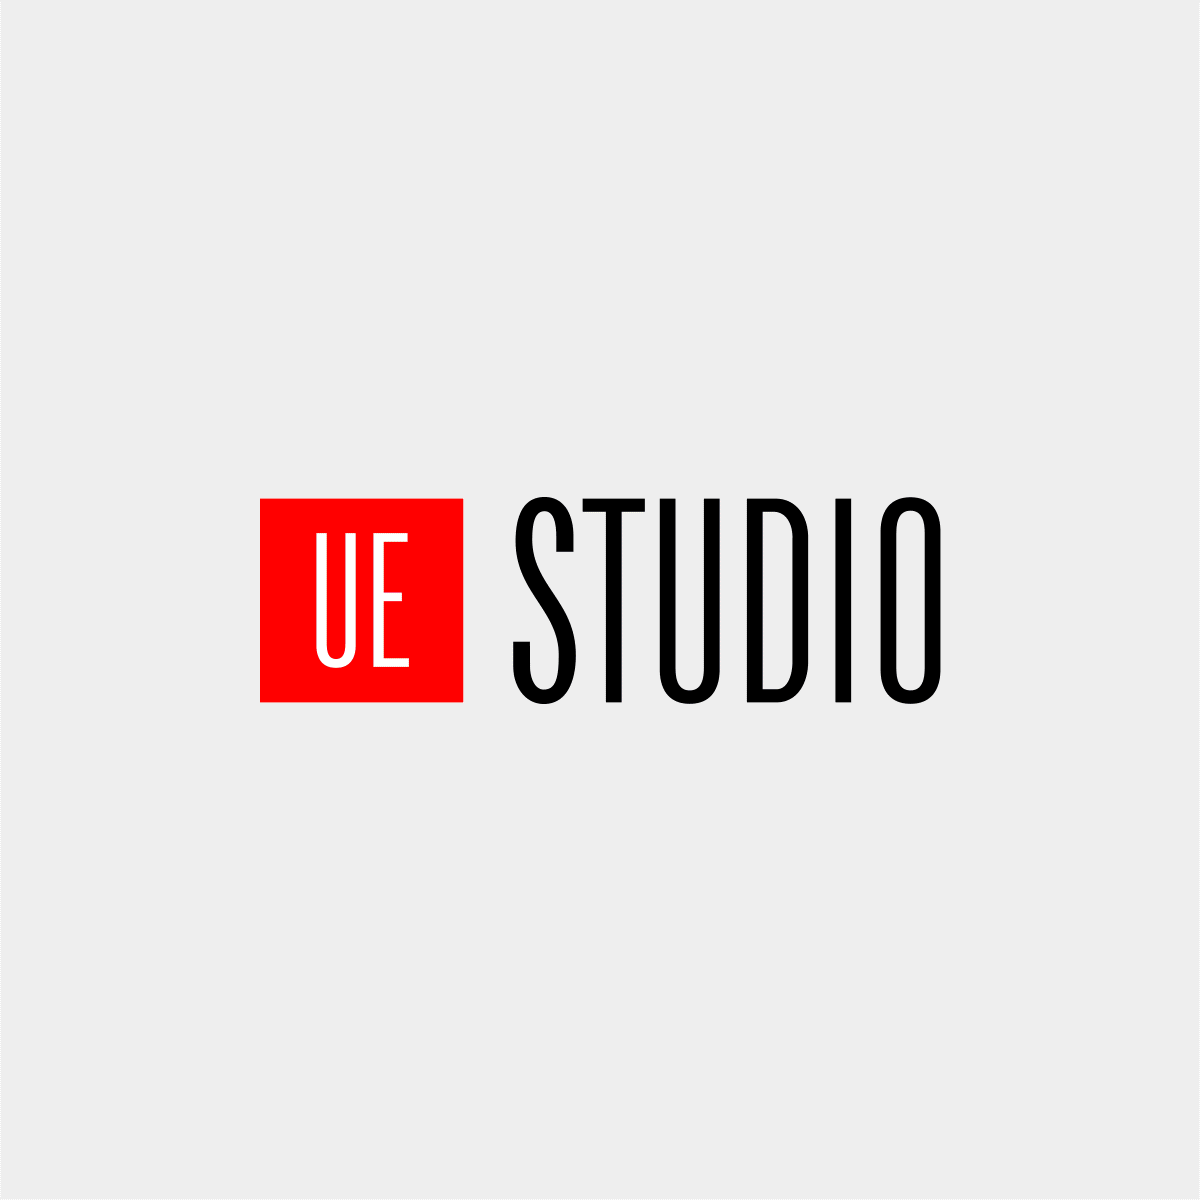 A looping gif of various photographs showcasing the work of UE Studio